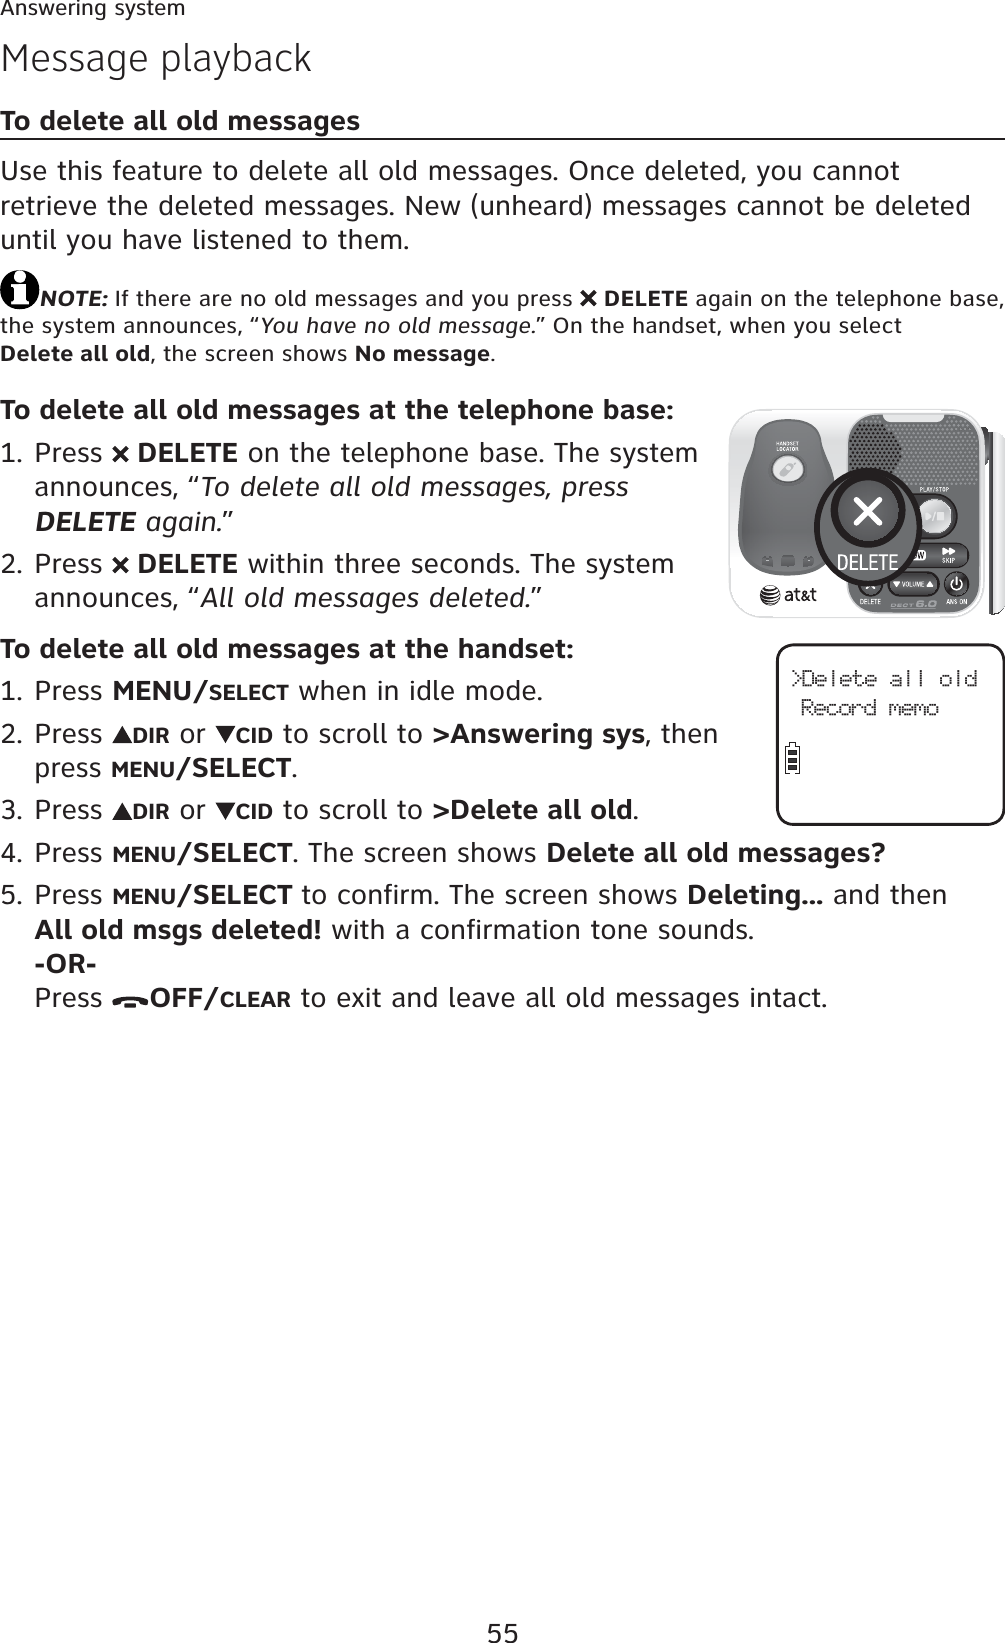 55Answering systemMessage playbackTo delete all old messagesUse this feature to delete all old messages. Once deleted, you cannot retrieve the deleted messages. New (unheard) messages cannot be deleted until you have listened to them.NOTE: If there are no old messages and you press  DELETE again on the telephone base, the system announces, “You have no old message.” On the handset, when you select Delete all old, the screen shows No message.To delete all old messages at the telephone base:Press   DELETE on the telephone base. The system announces, “To delete all old messages, press DELETE again.”Press   DELETE within three seconds. The system announces, “All old messages deleted.”To delete all old messages at the handset:Press MENU/SELECT when in idle mode.Press  DIR or  CID to scroll to &gt;Answering sys, then press MENU/SELECT.Press  DIR or  CID to scroll to &gt;Delete all old.Press MENU/SELECT. The screen shows Delete all old messages?Press MENU/SELECT to confirm. The screen shows Deleting... and then All old msgs deleted! with a confirmation tone sounds.-OR-Press  OFF/CLEAR to exit and leave all old messages intact.1.2.1.2.3.4.5.&gt;Delete all oldRecord memo